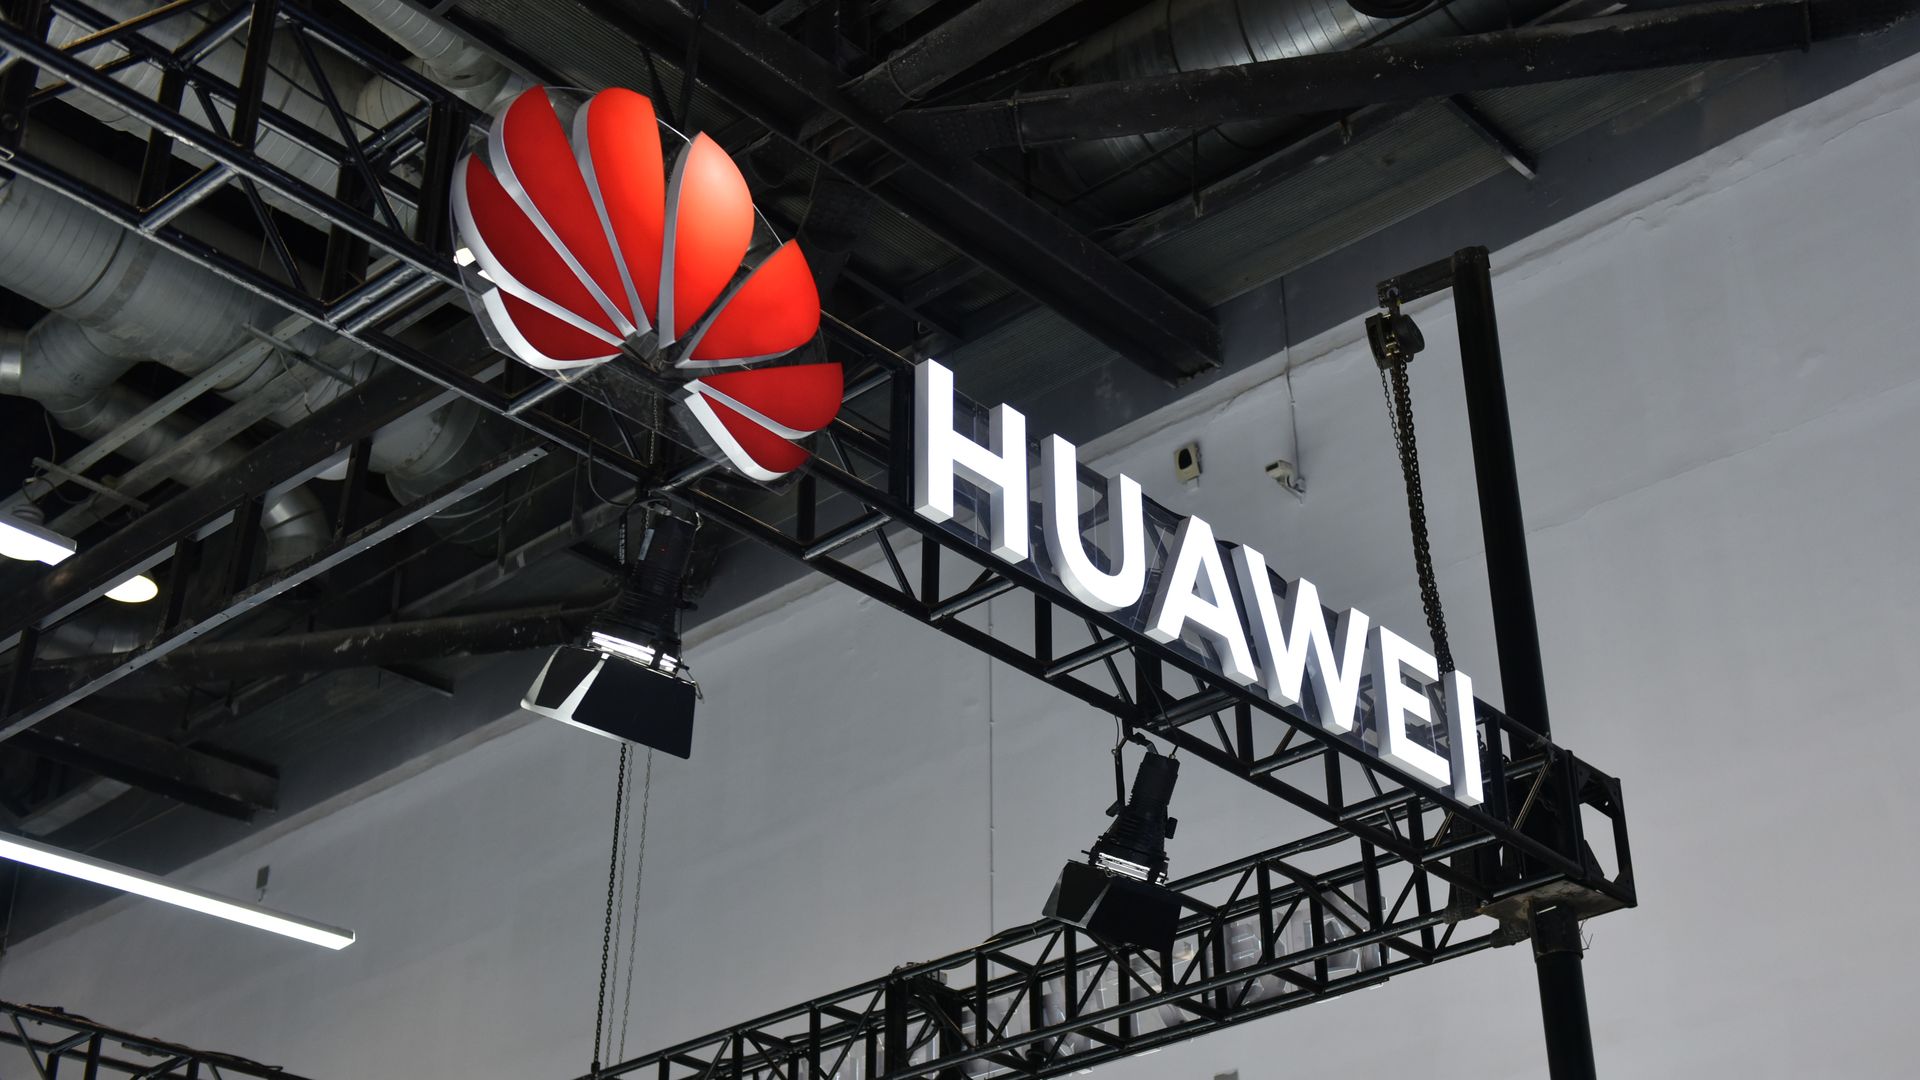 Photo of the Huawei logo hung up as a sign overlooking an exhibition room